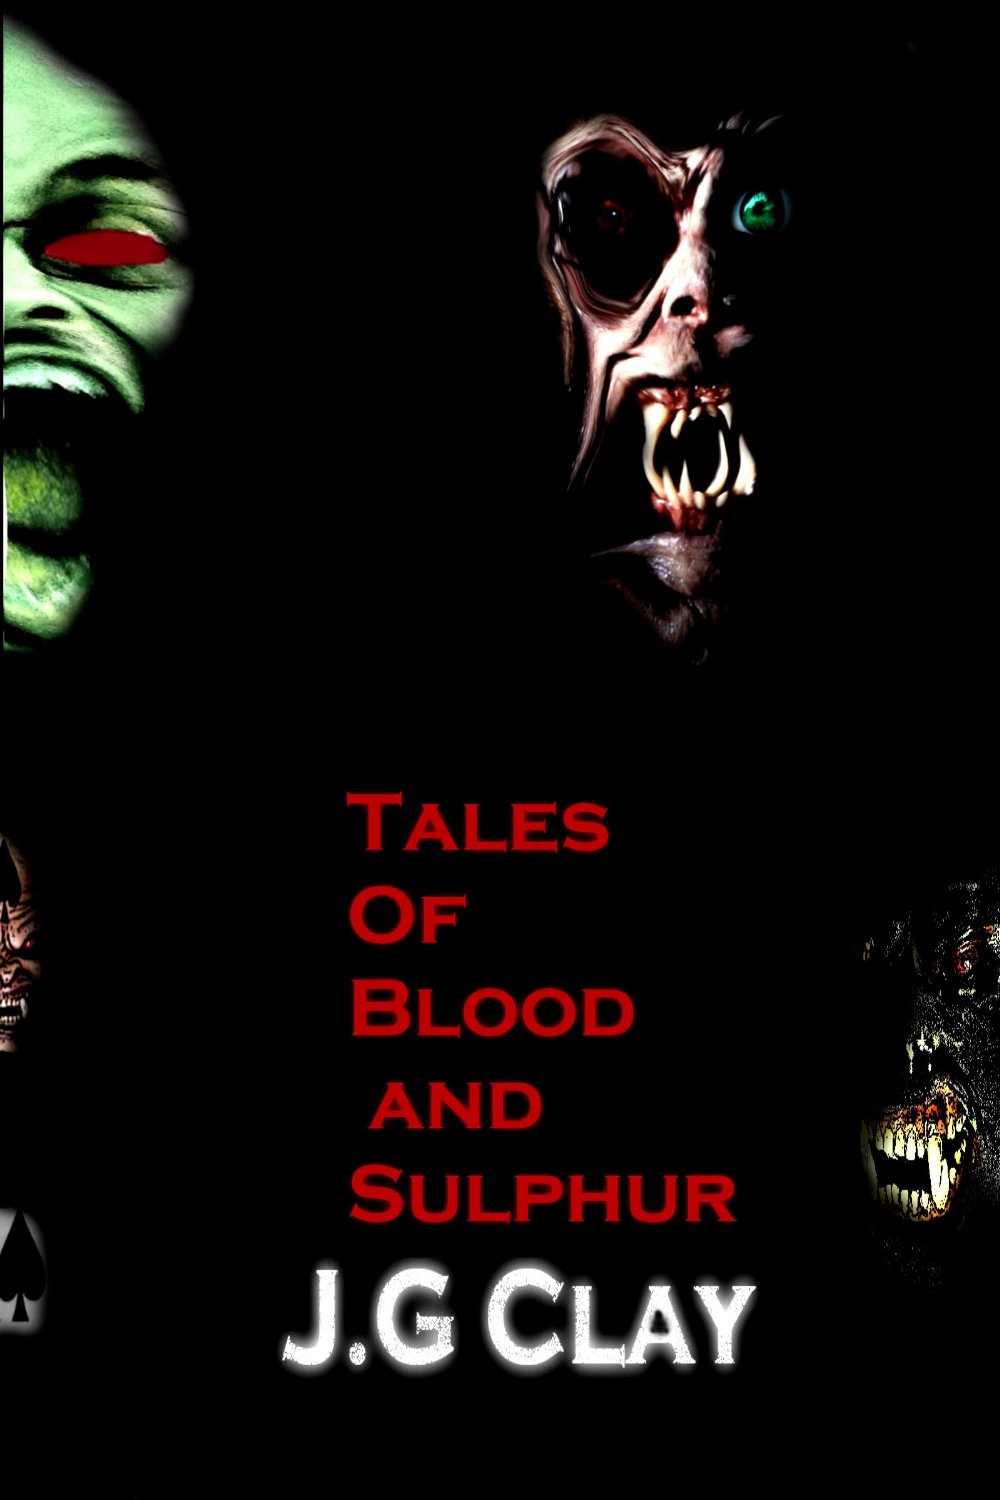 Tales of Blood and Sulphur by J.G Clay